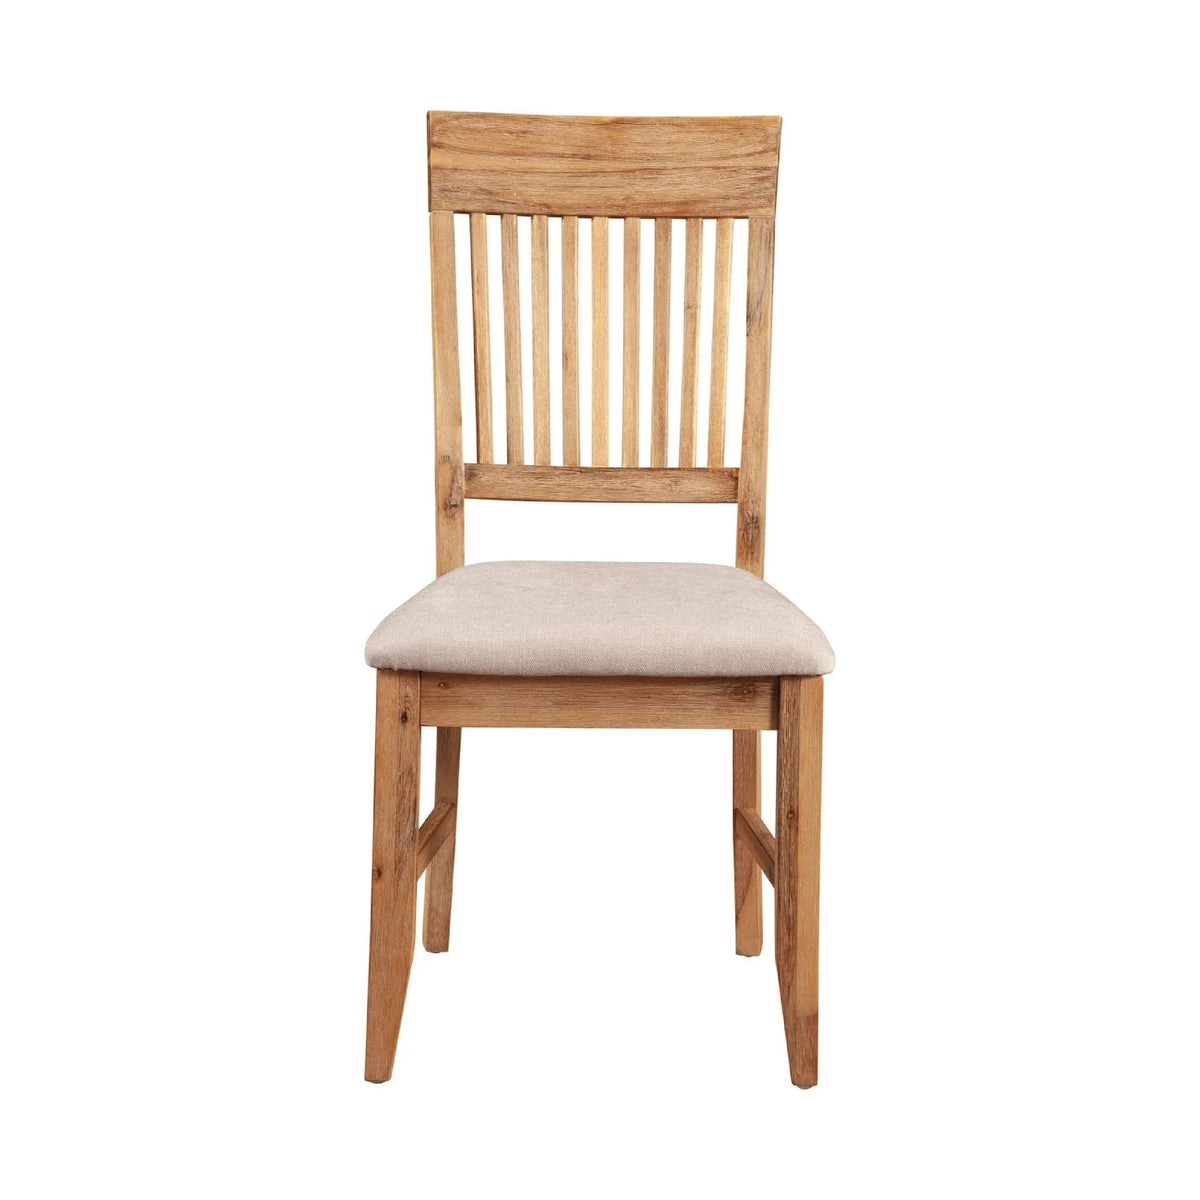 BM172052 High Back Wooden Side Chair Set Of 2 Natural Brown And Beige